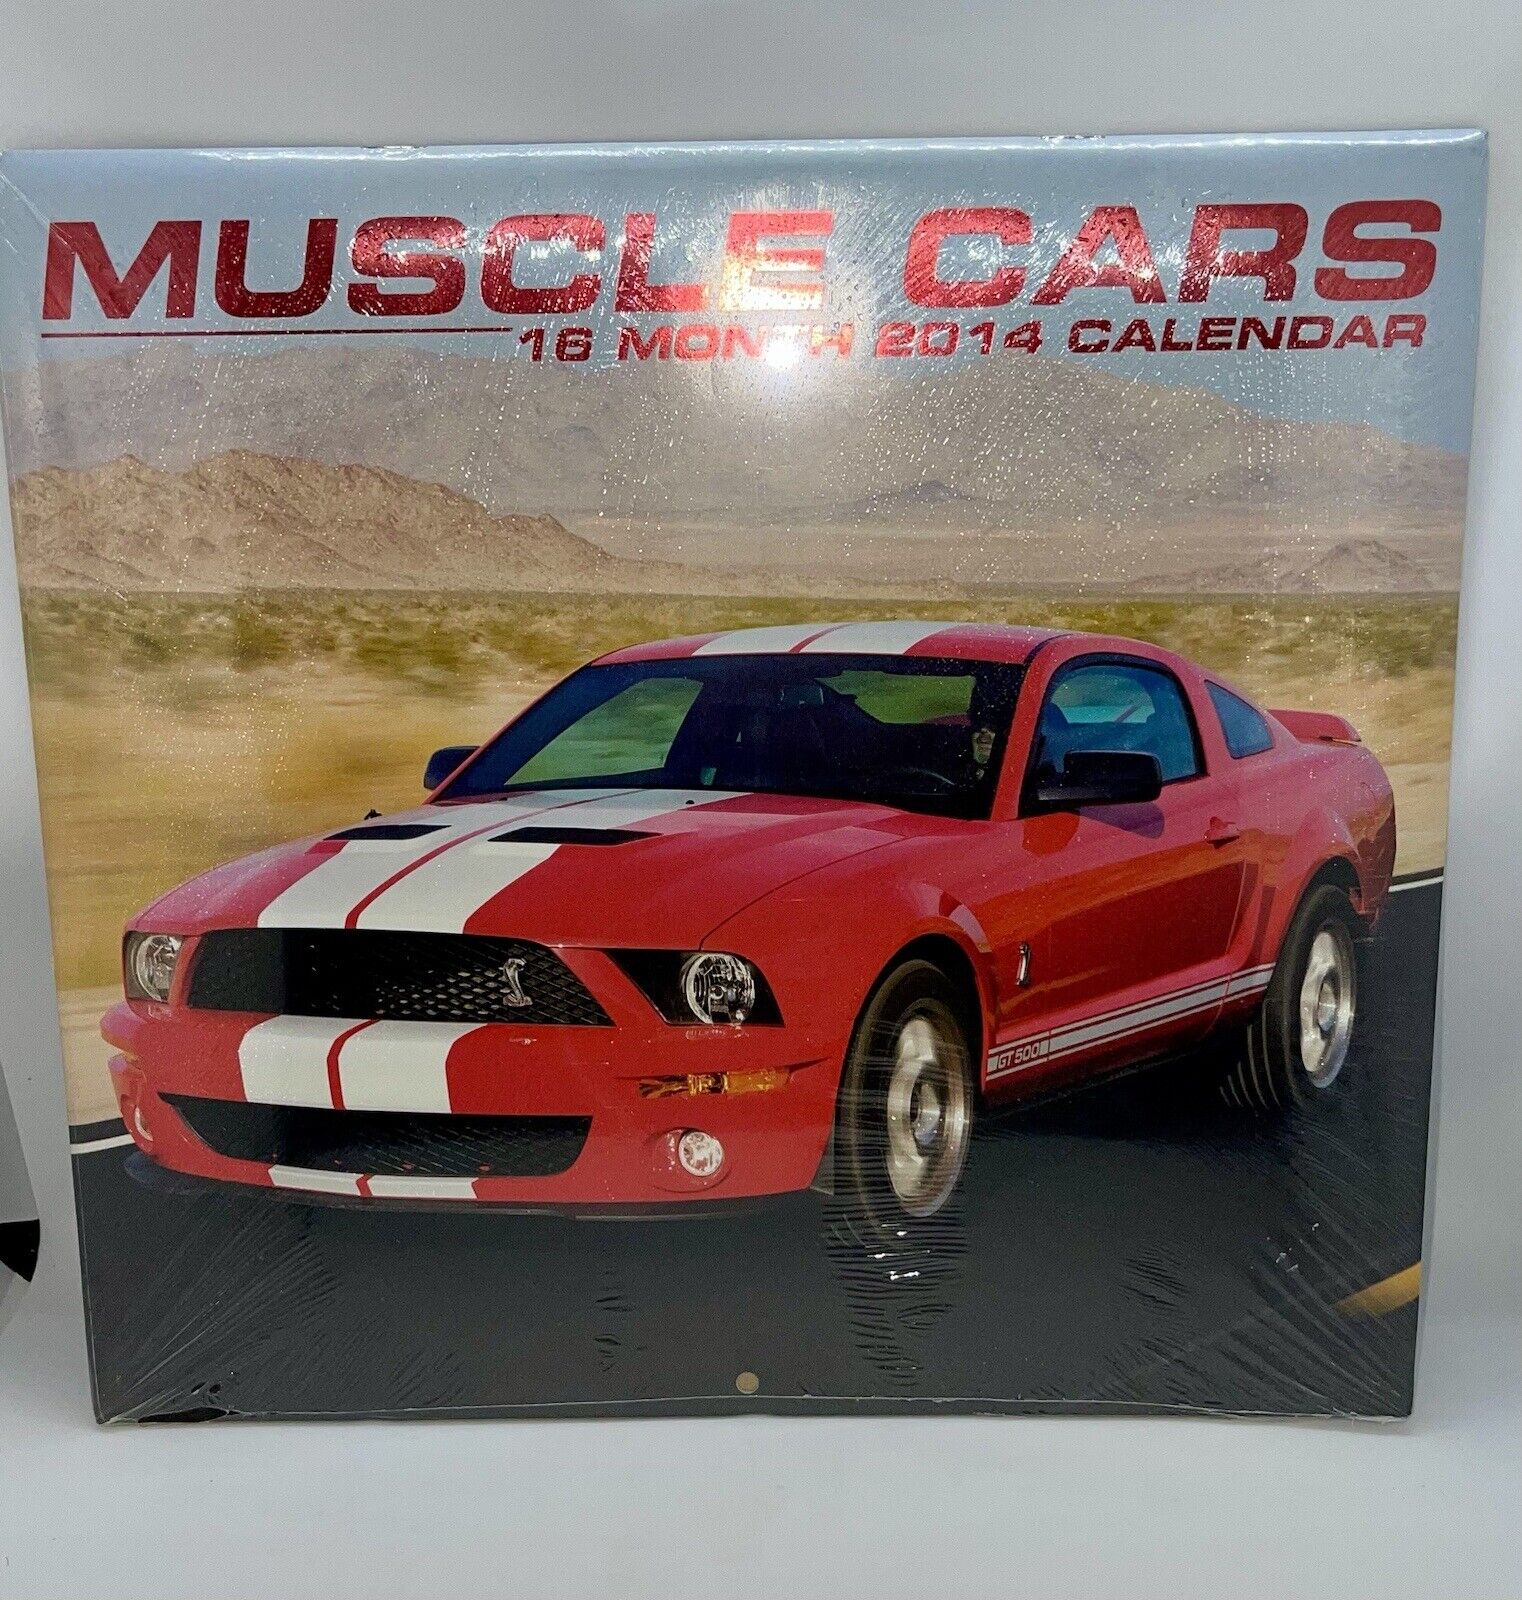 Collectible Muscle Cars 2014 Calendar, Mustang, GTO, Viper, Challenger.